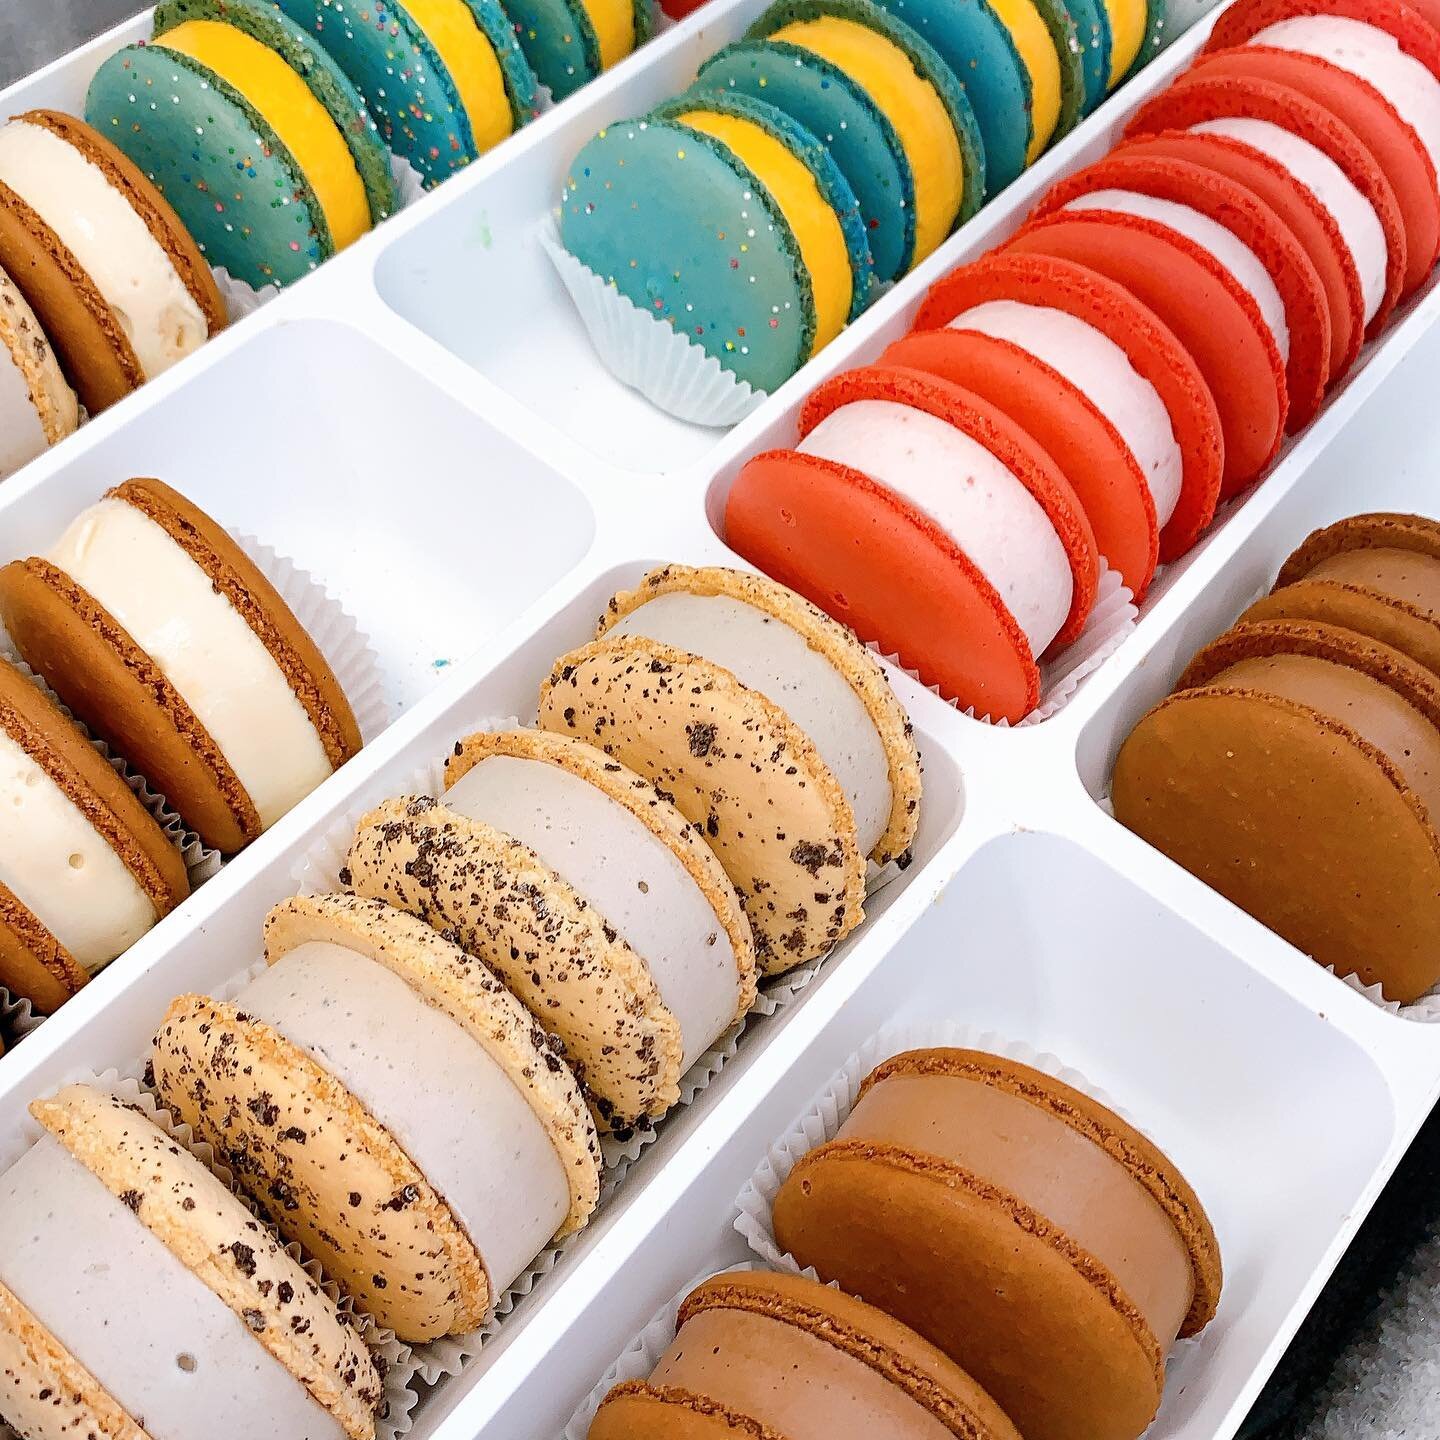 It&rsquo;s the long weekend! Time to treat yo&rsquo;self😍 Stop by our Plano or Dallas location ! We open 11am -6:00pm 

#ChellesMacarons #macaron #frenchmacarons #bakery #baking #foodie #sweettooth #cookies #dallasfoodie #instafood #instagood #desse